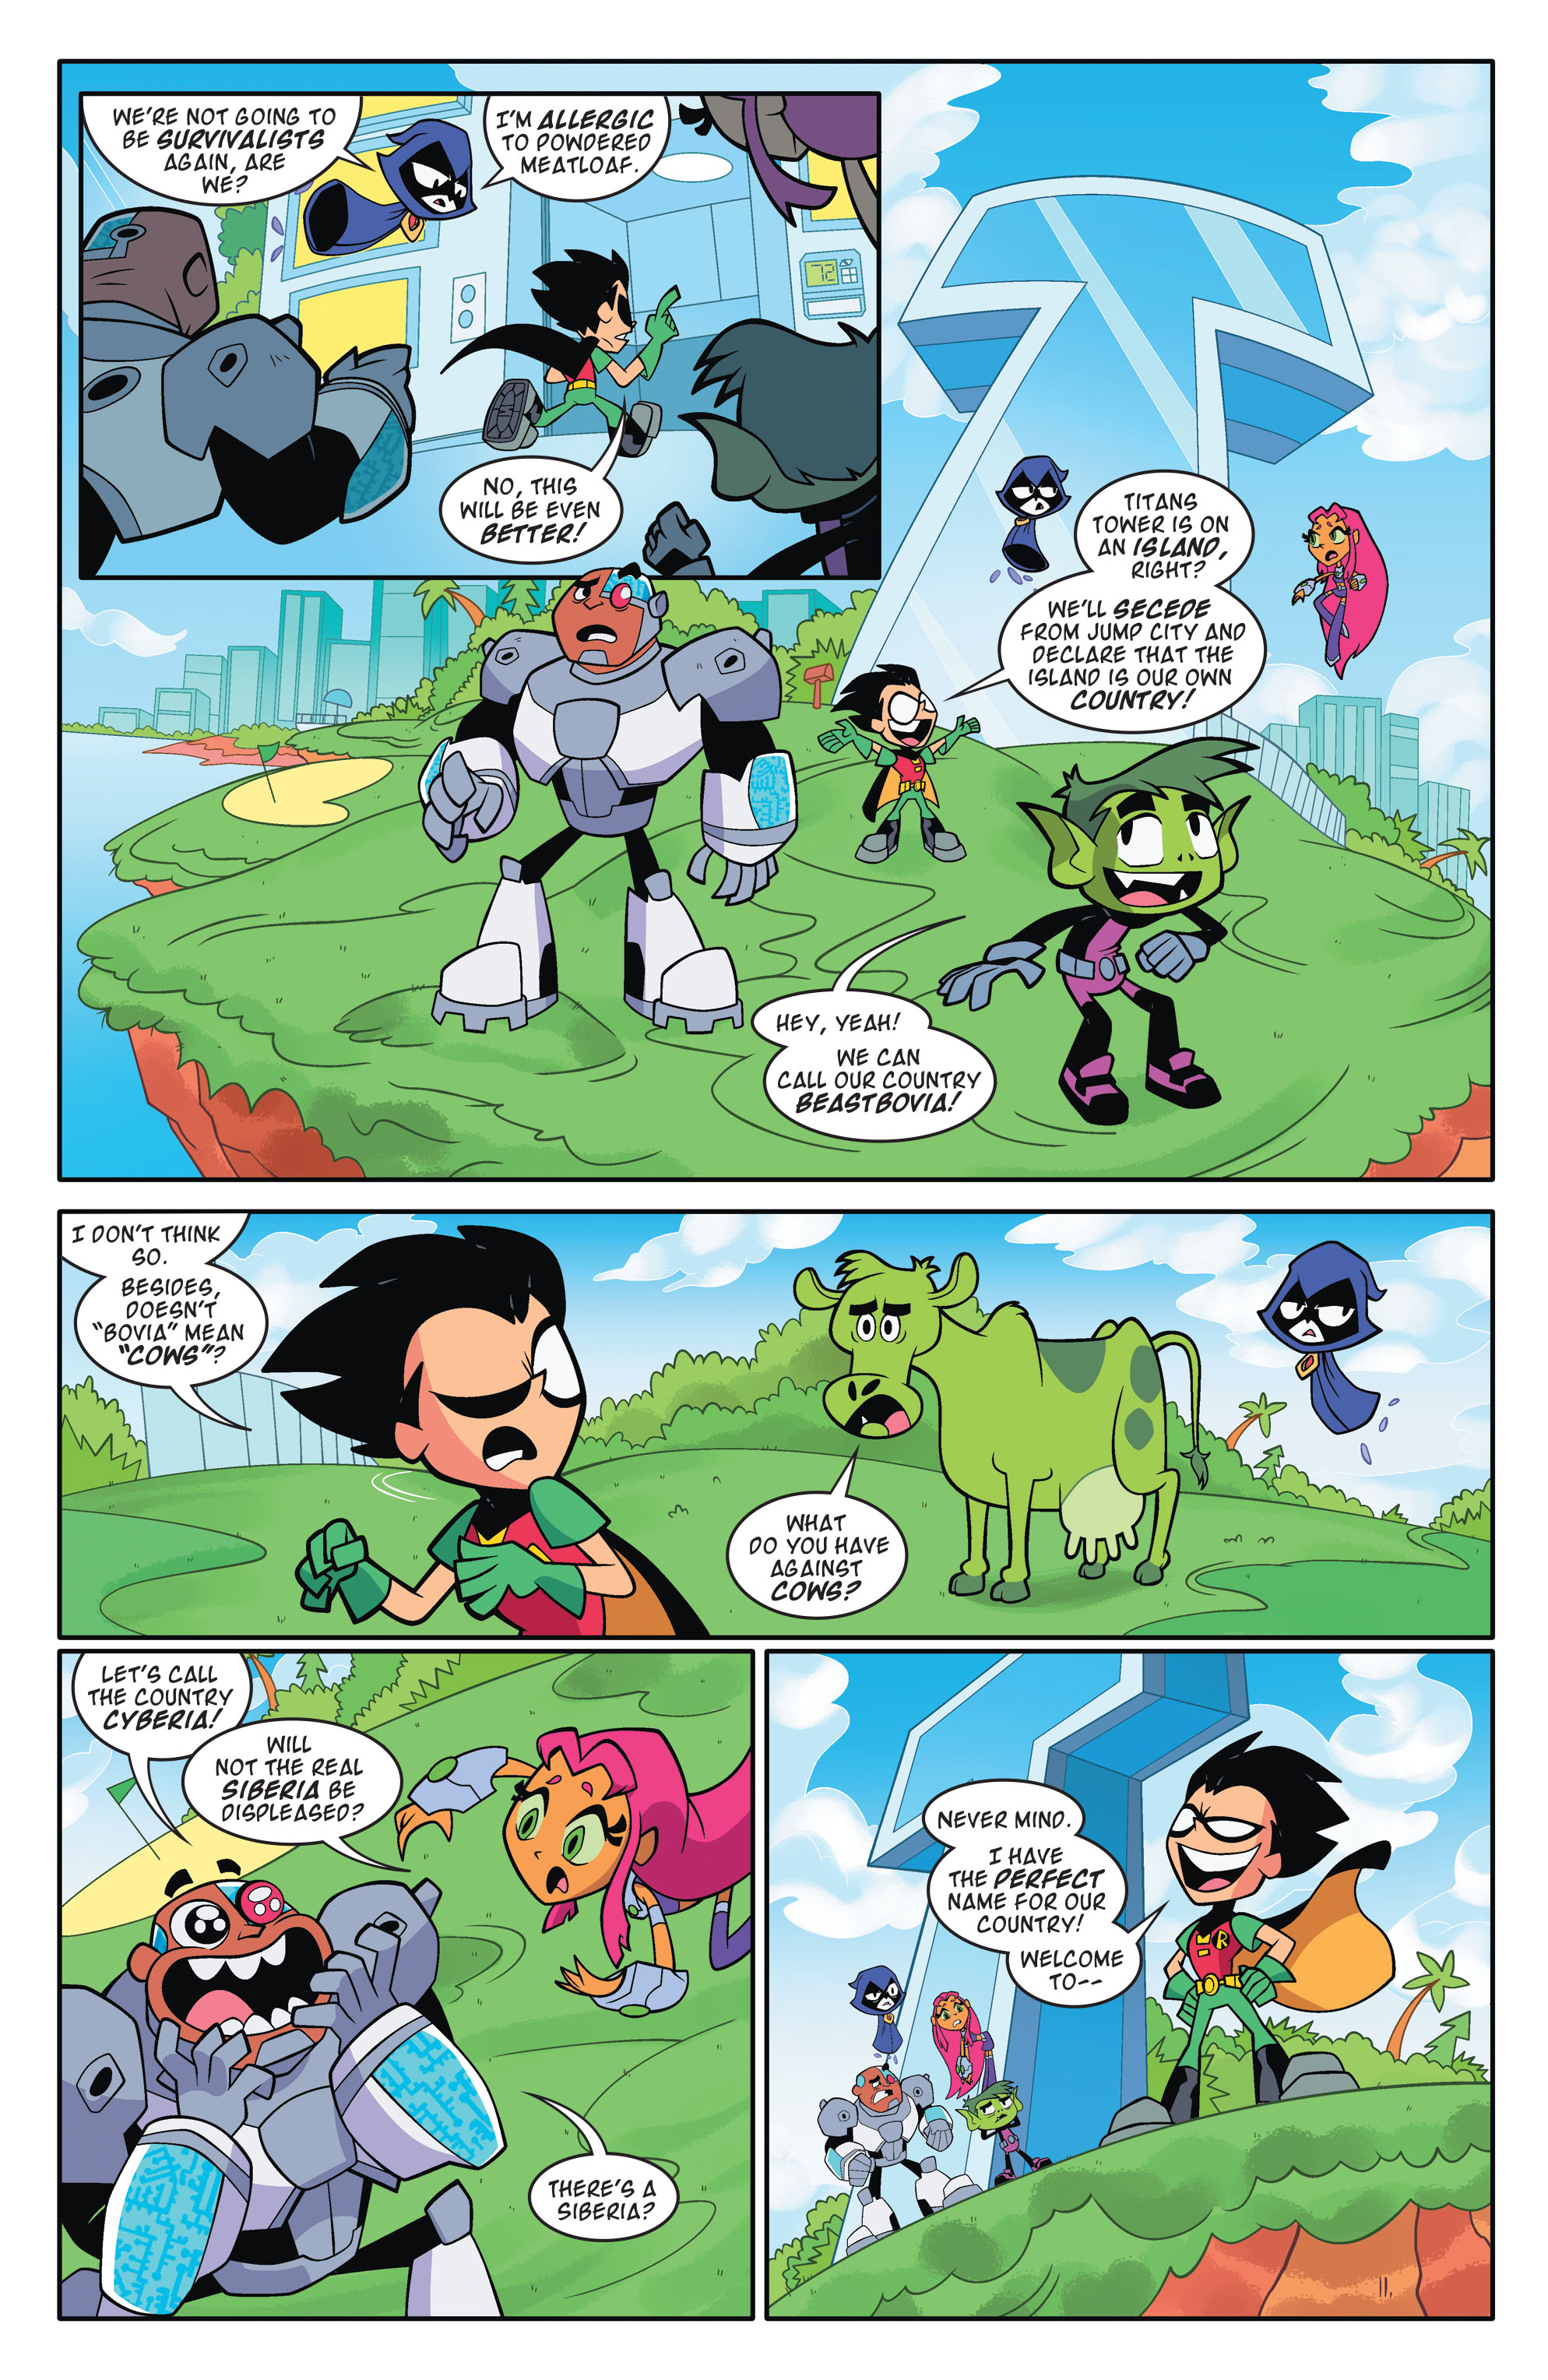 Teen Titans Go!: Booyah! (2020-): Chapter 2 - Page 4